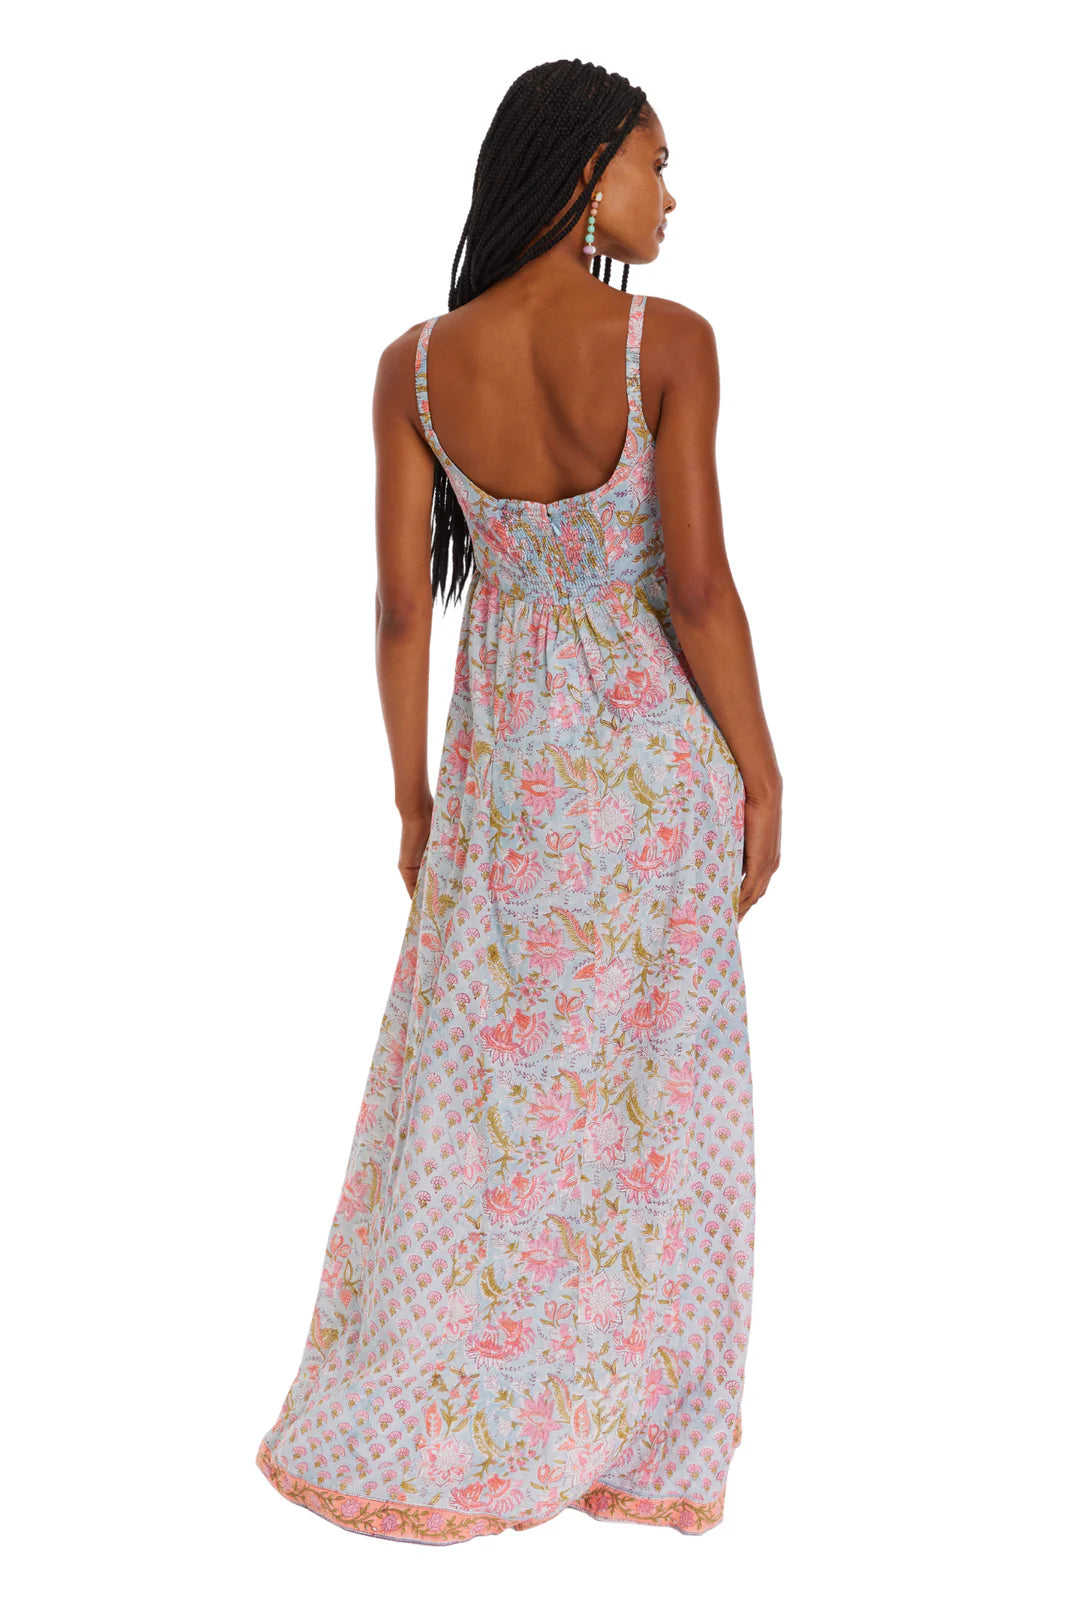 Allison New York Martina Maxi Dress in Blue/Coral Floral